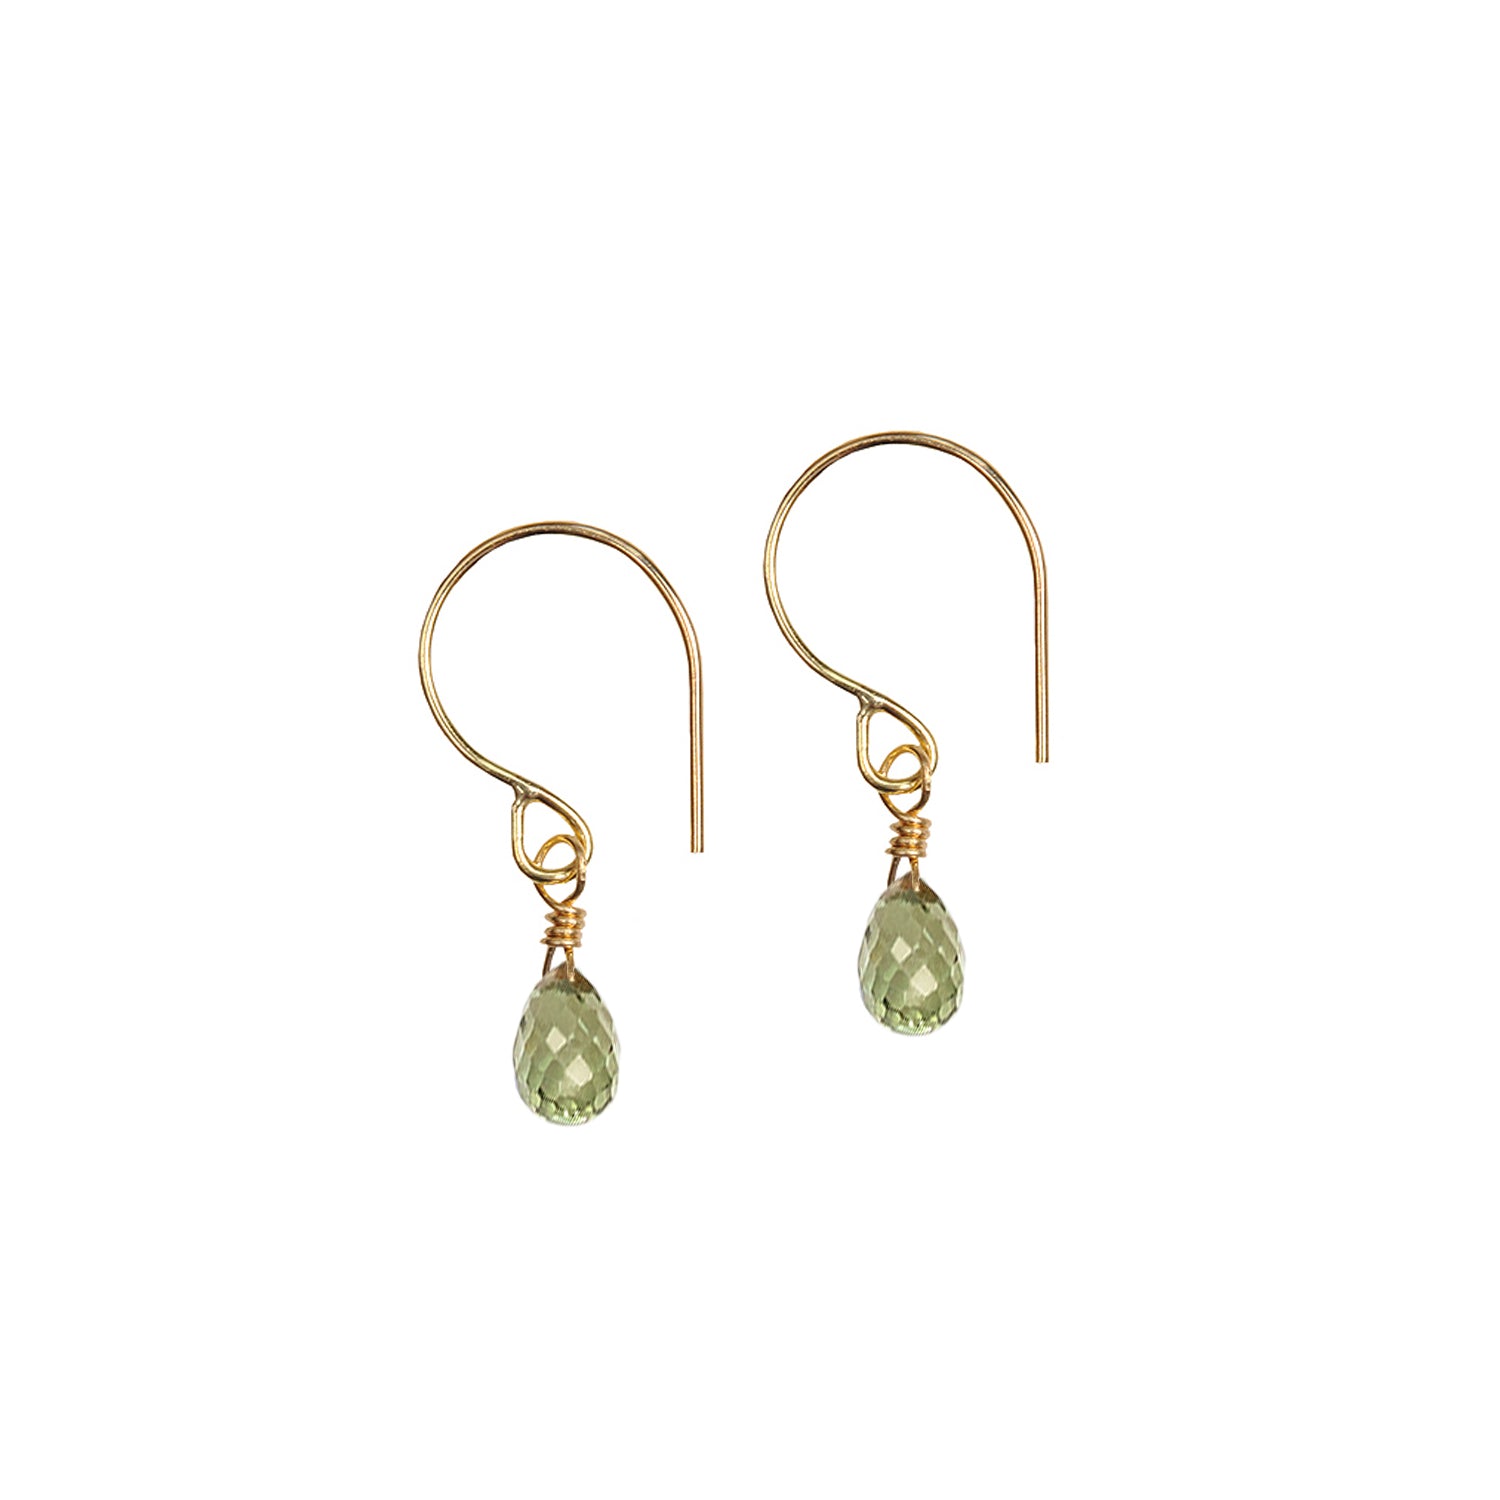 18ct yellow gold fine hook earrings with small green Sapphire drop